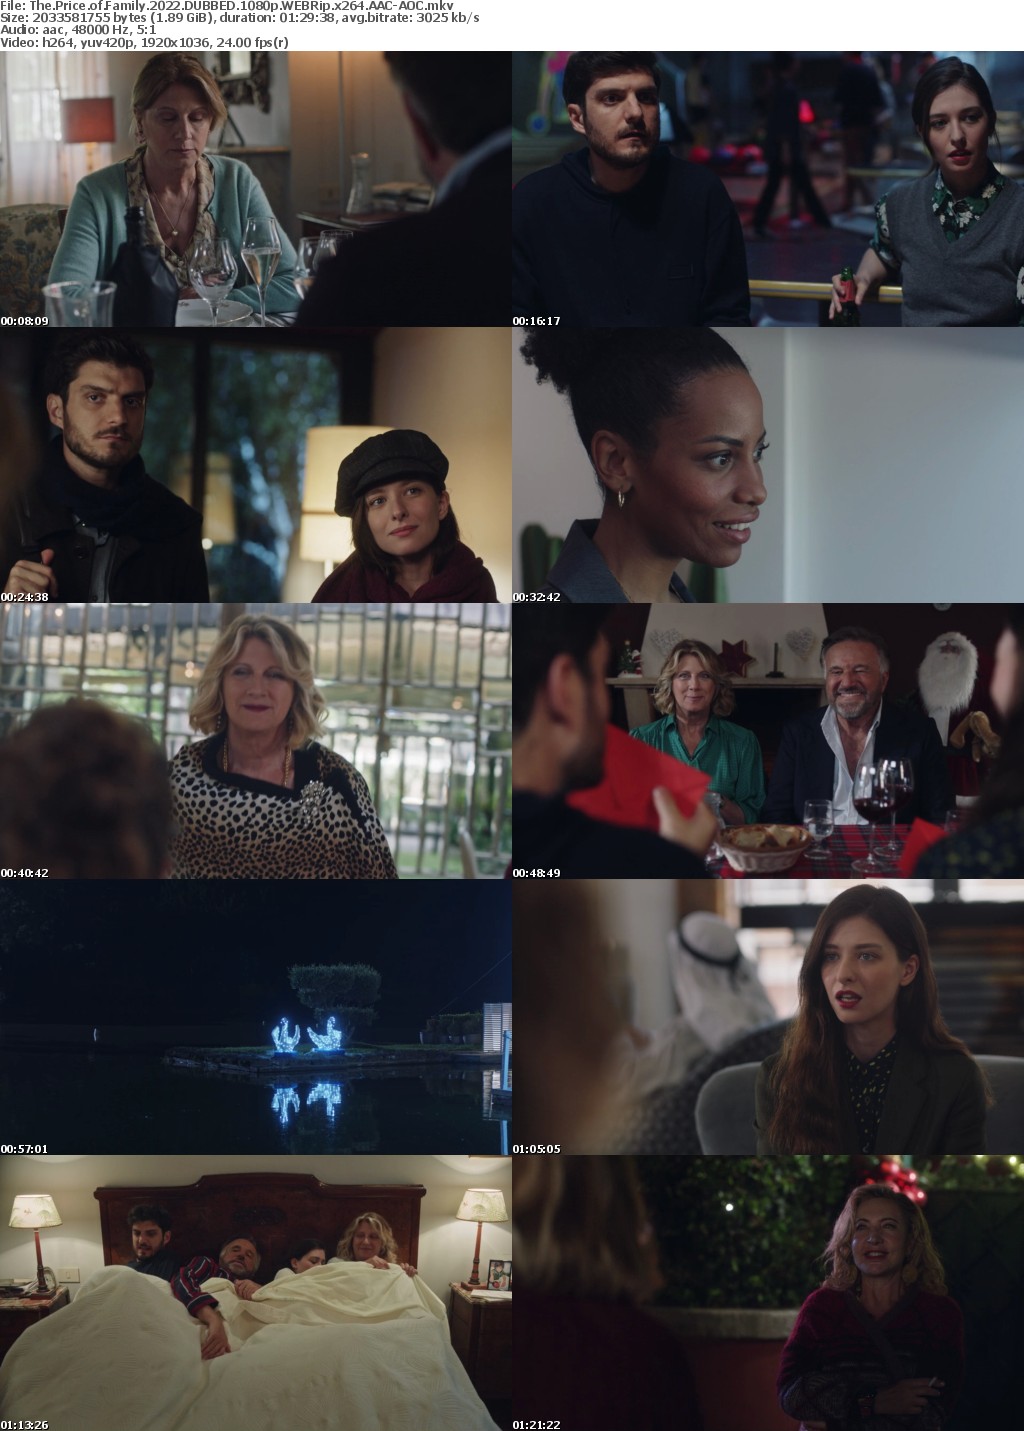 The Price of Family 2022 DUBBED 1080p WEBRip x264 AAC-AOC